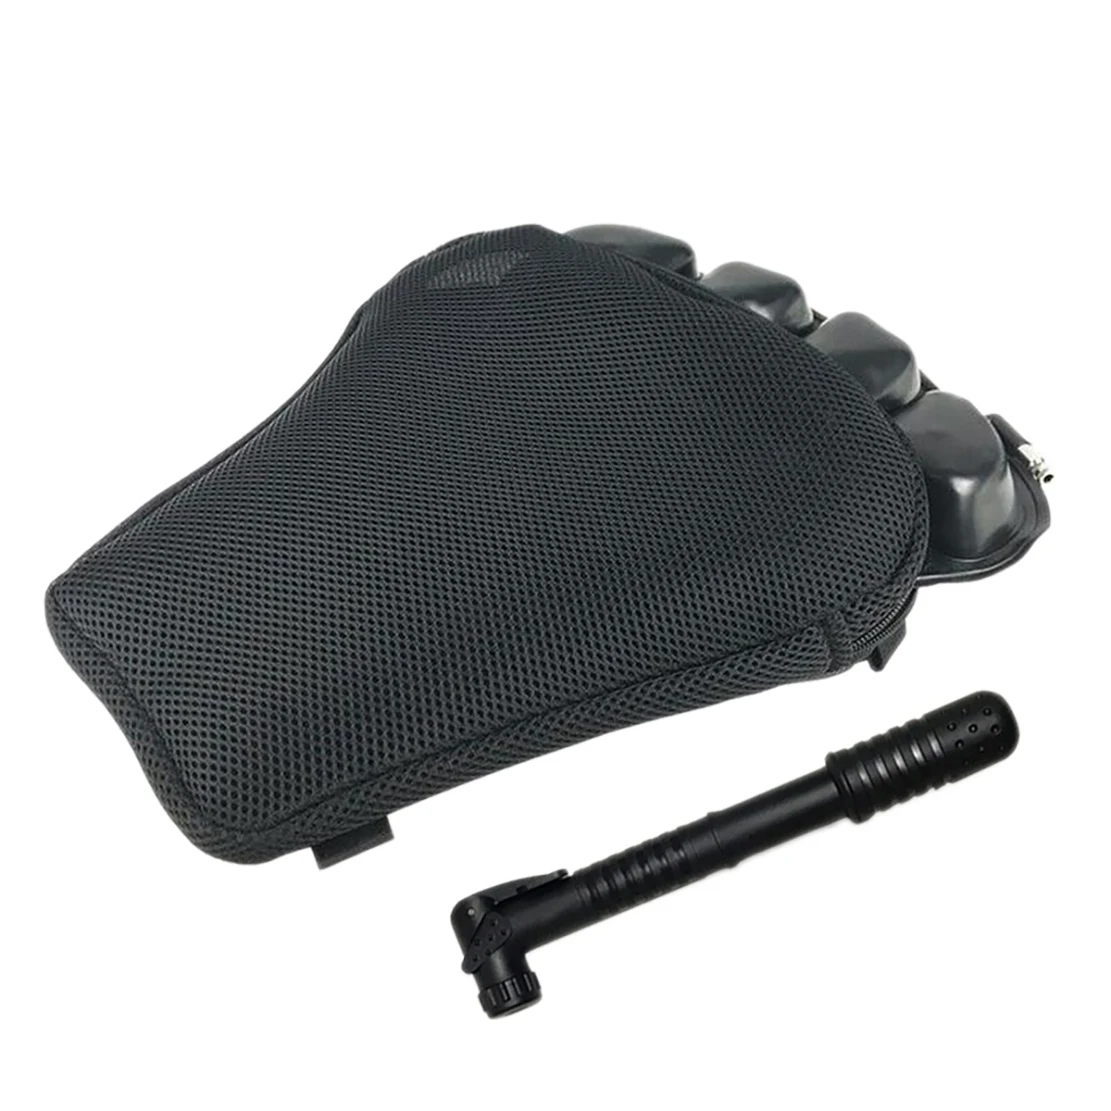 

Universal Motorcycle Air Pad 3D Inflatable Shock Absorption Seat Cushion for CBR600 Z800 Z900 R1200GS R1250GS GSXR 600